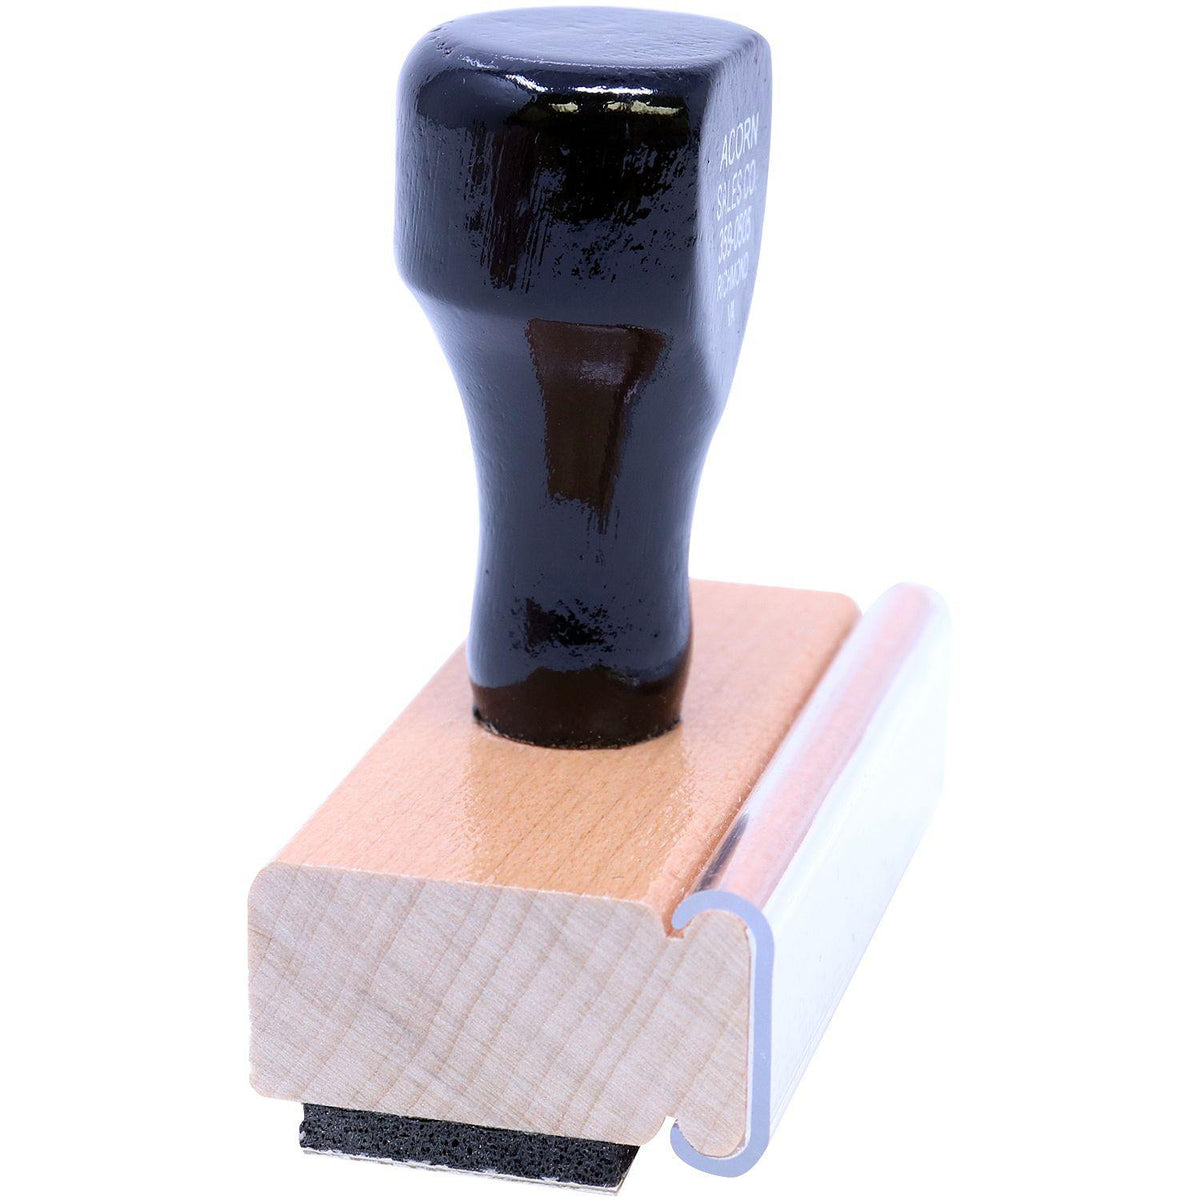 Side View of File Rubber Stamp at an Angle